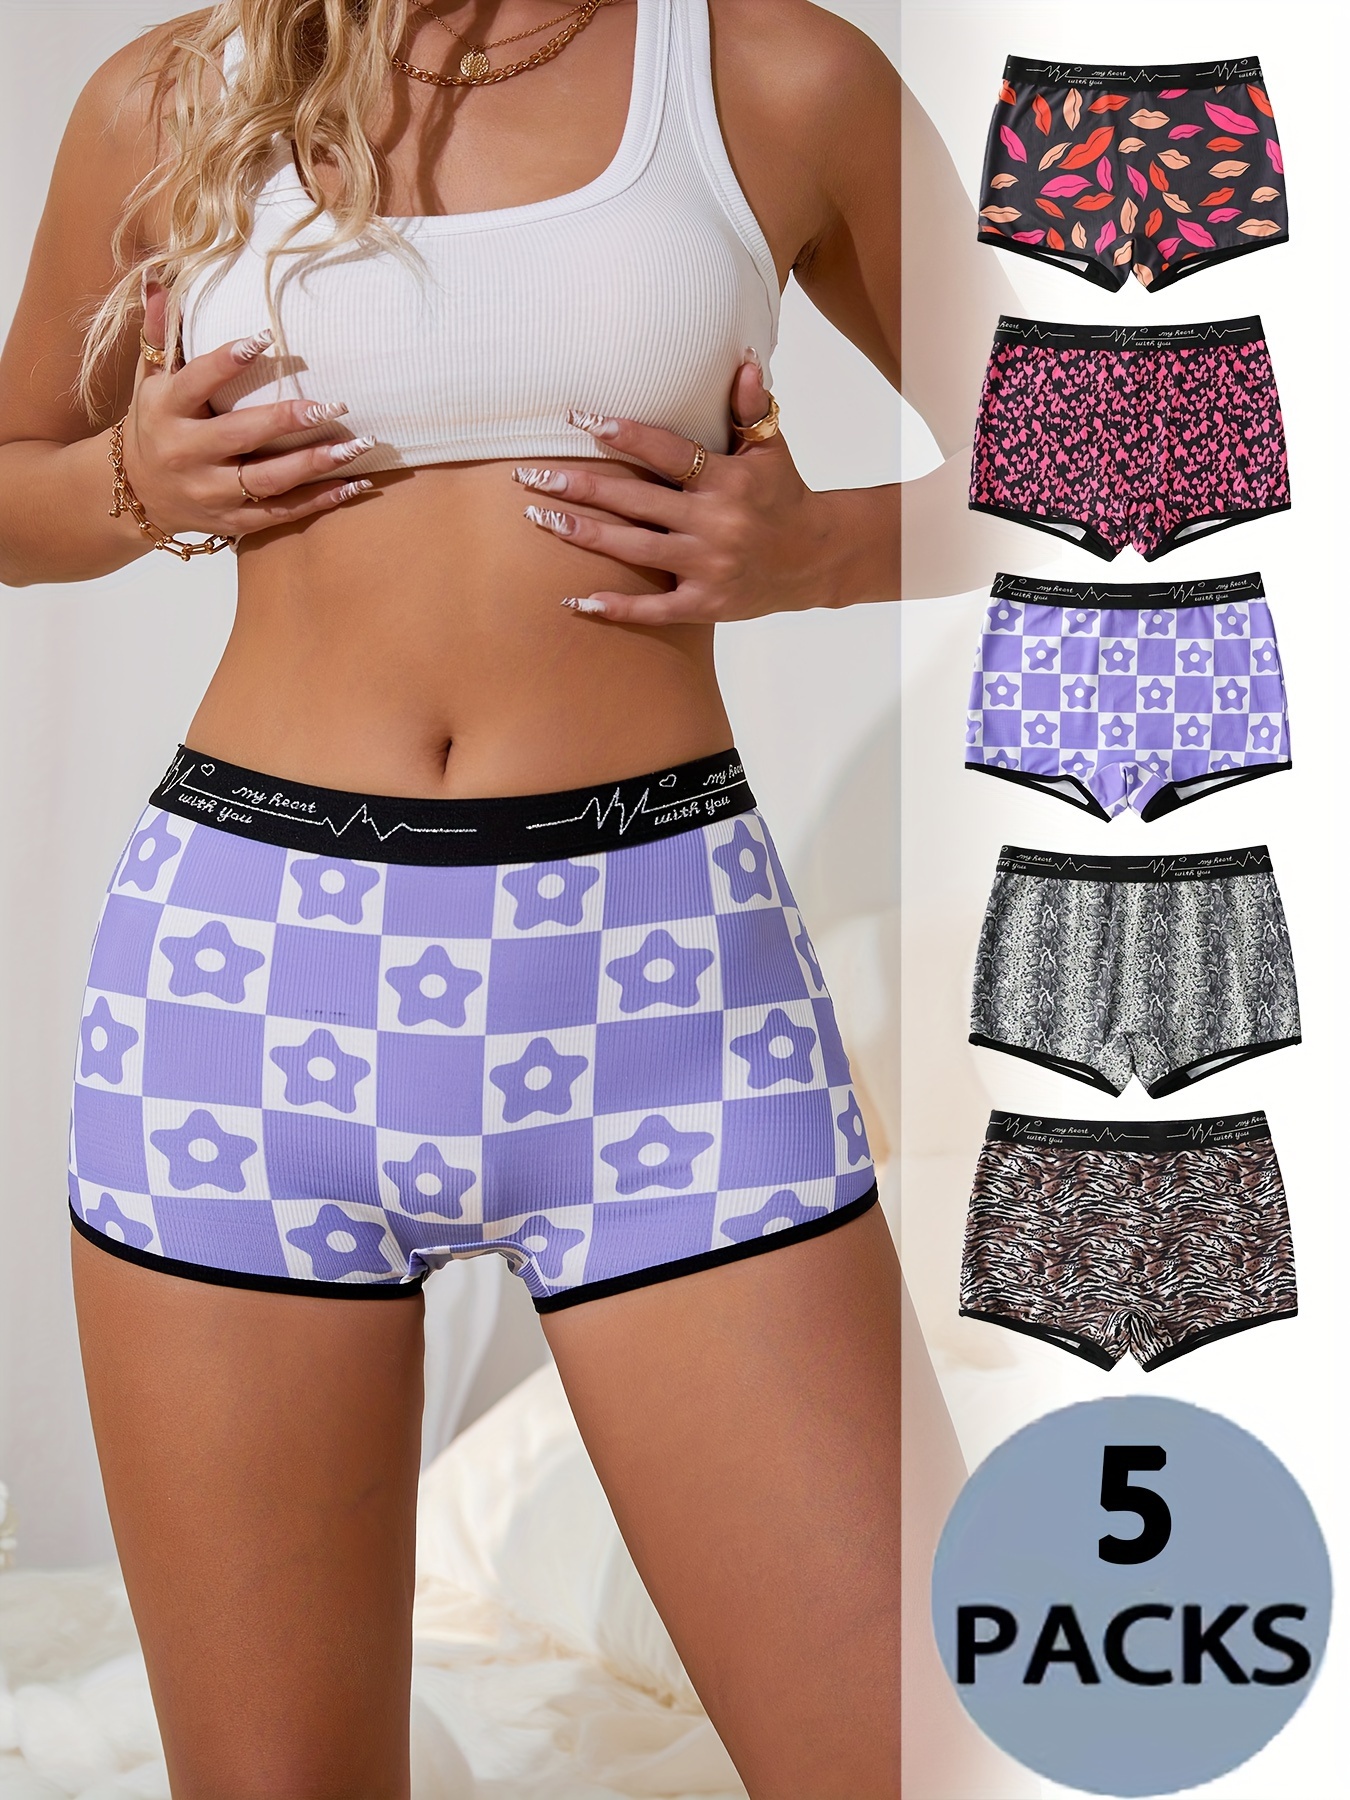 1 Pc Romatic Boyshort Panty, Valentine's Day Heart Print High Waisted Comfy  Intimates Boxer Shorts, Women's Lingerie & Underwear